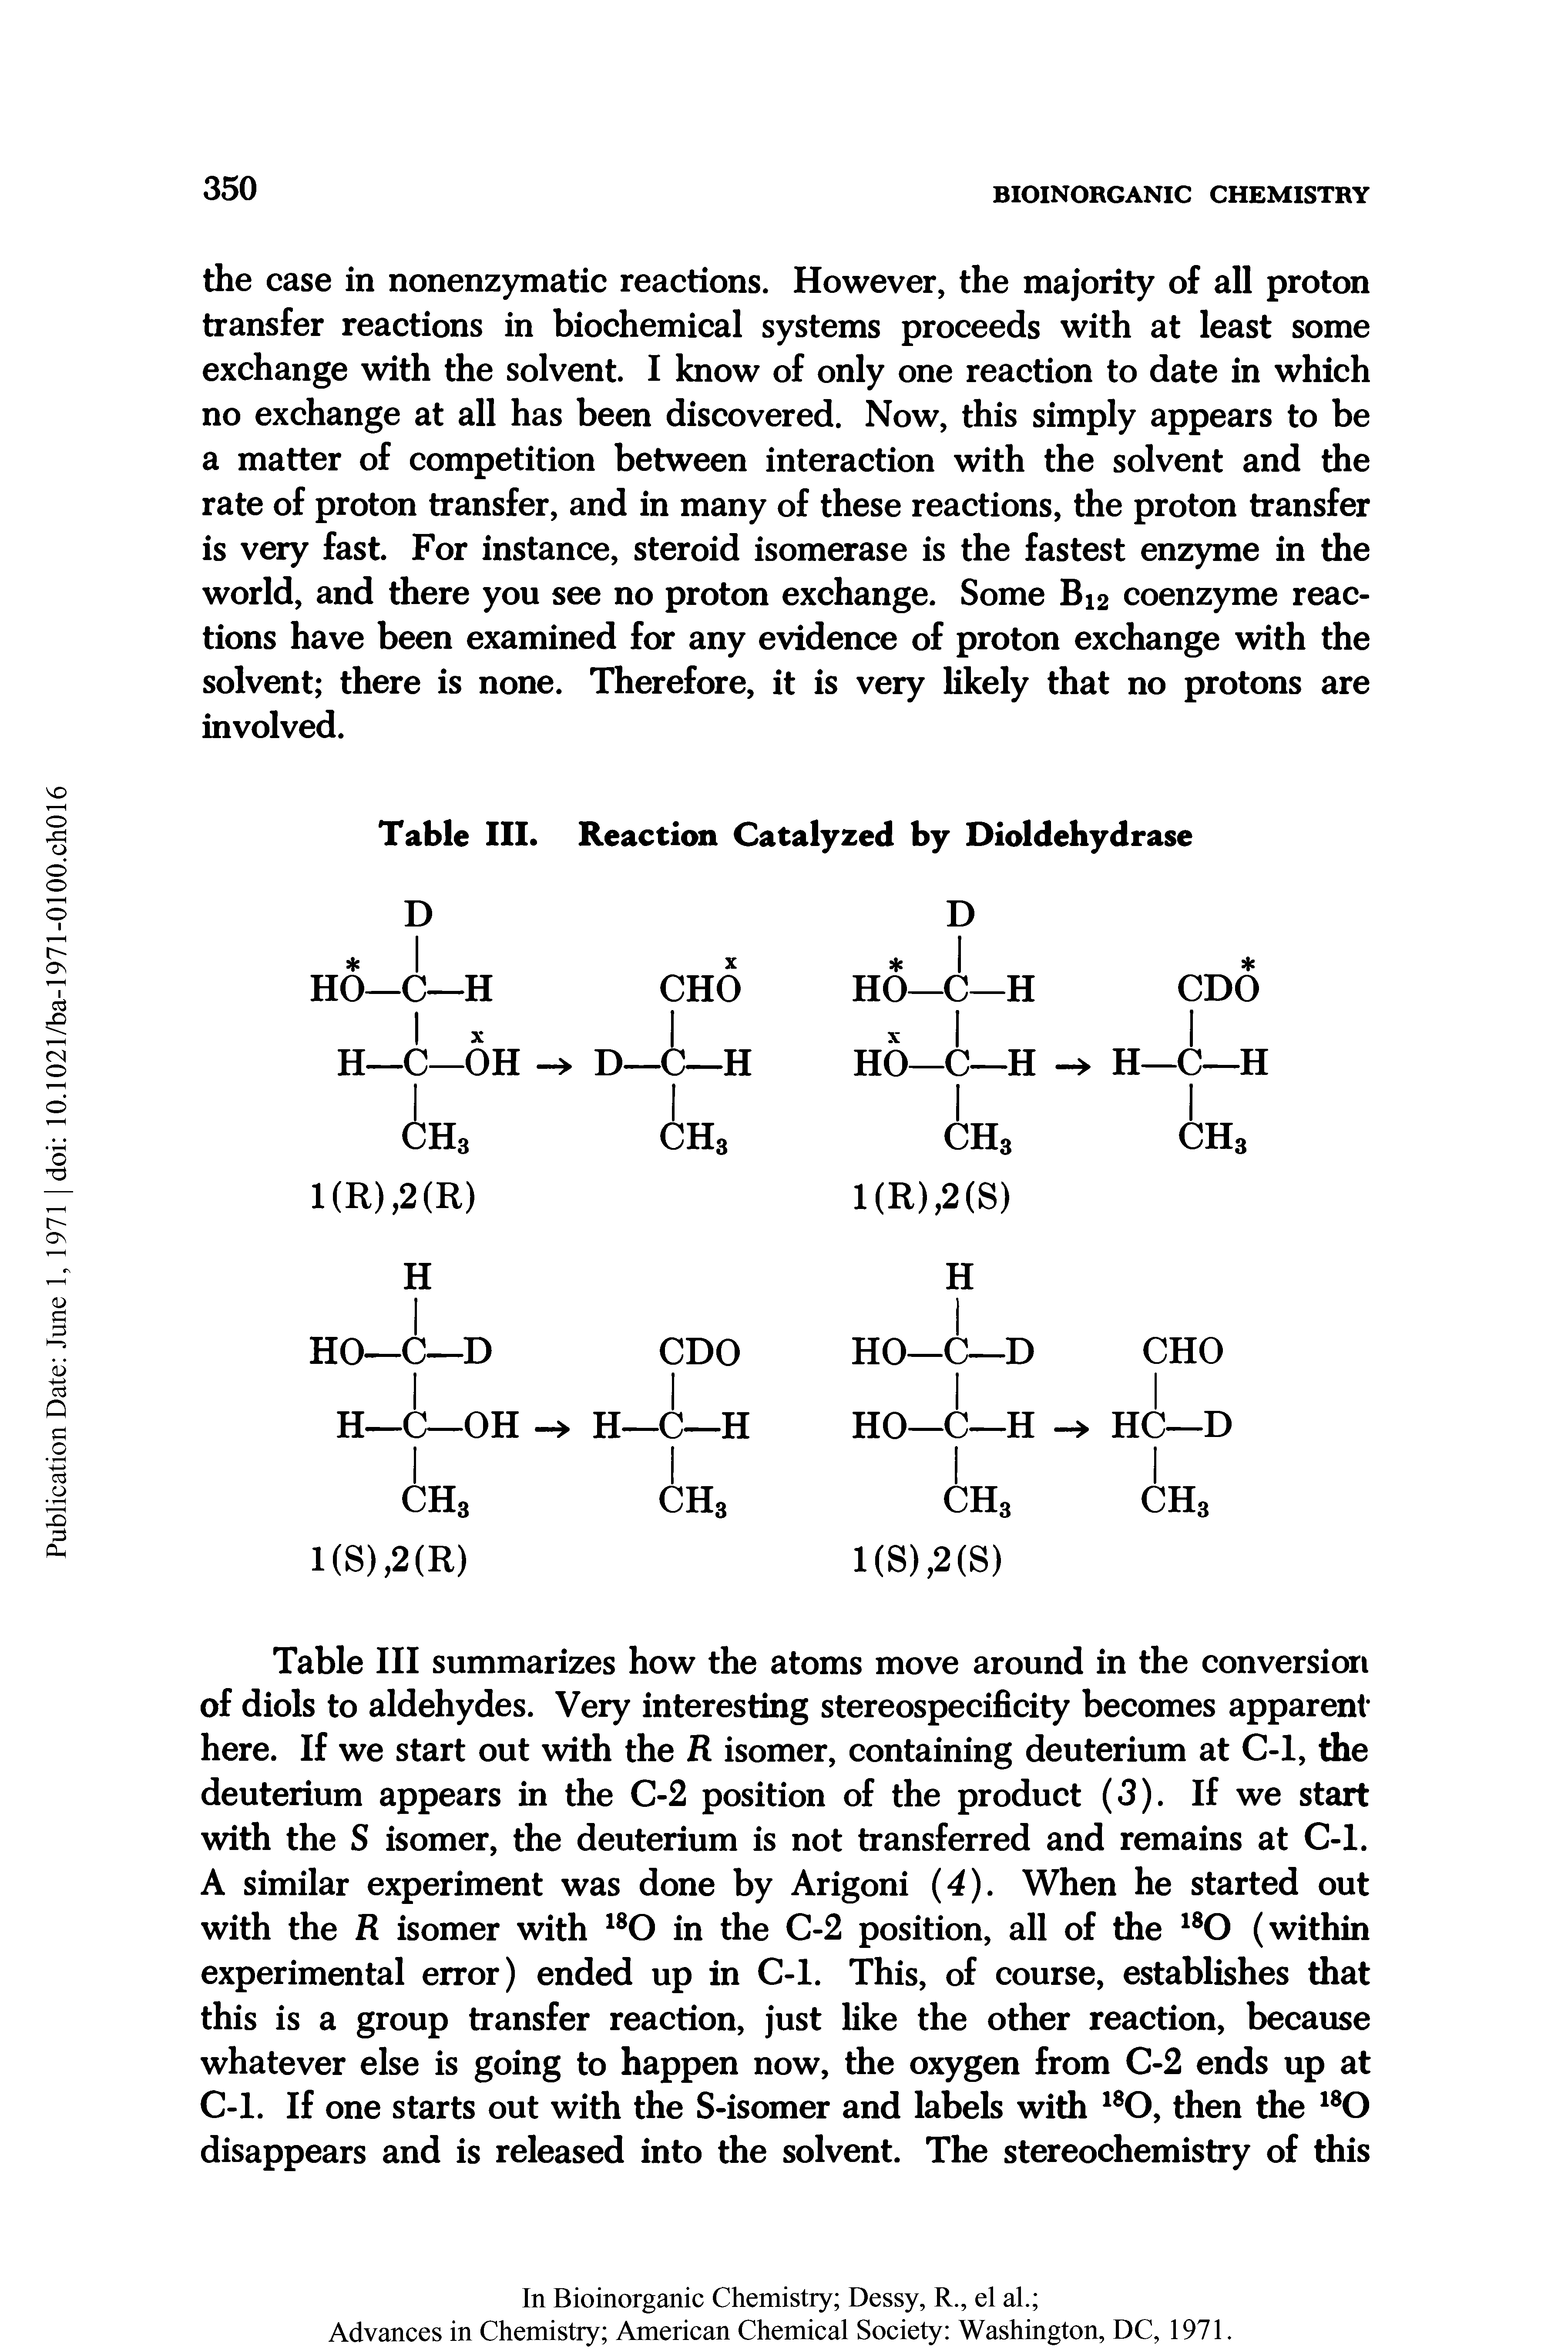 Table III summarizes how the atoms move around in the conversion of diols to aldehydes. Very interesting stereospecificity becomes apparent here. If we start out with the R isomer, containing deuterium at C-1, the deuterium appears in the C-2 position of the product (3). If we start with the S isomer, the deuterium is not transferred and remains at C-1. A similar experiment was done by Arigoni (4). When he started out with the R isomer with in the C-2 position, all of the (within experimental error) ended up in C-1. This, of course, establishes that this is a group transfer reaction, just like the other reaction, because whatever else is going to happen now, the oxygen from C-2 ends up at C-1. If one starts out with the S-isomer and labels with then the disappears and is released into the solvent. The stereochemistry of this...